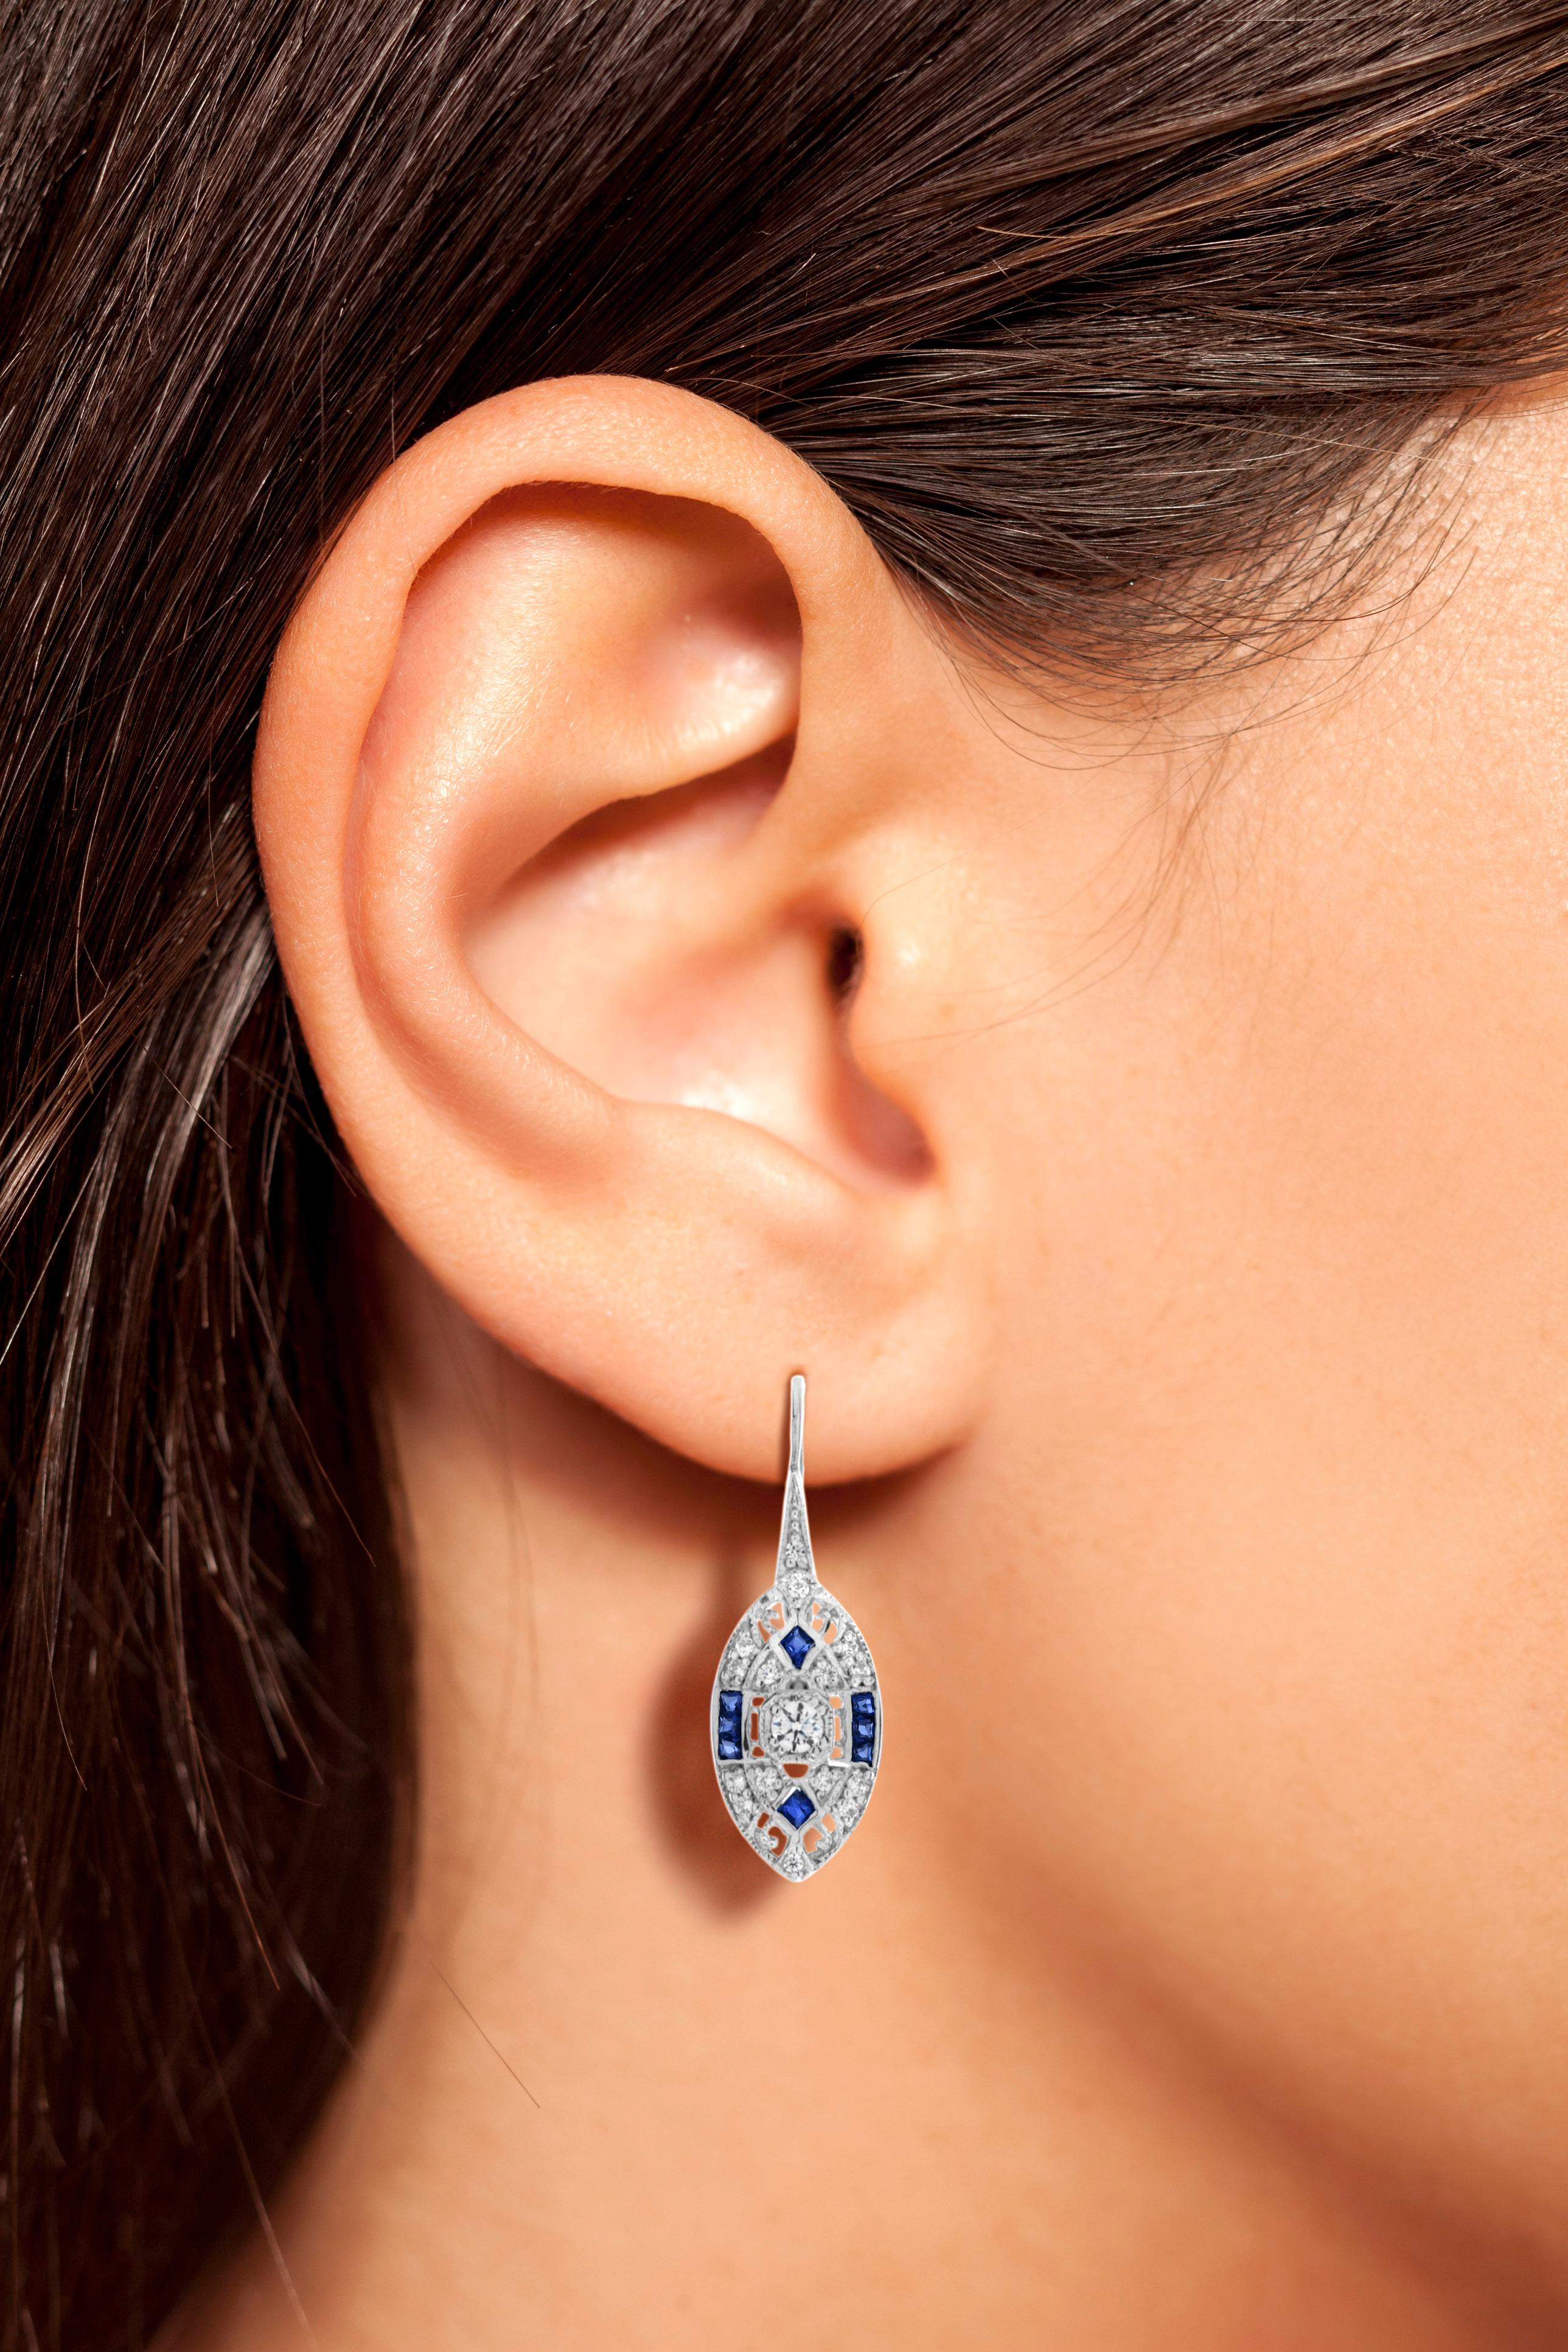 A pair of Art Deco style sapphire and diamond lever back earrings, set with French cut sapphires and round cut diamonds. Mounted in 14k white gold.

Information
Metal: 14K White Gold
Width: 8 mm.
Length: 25 mm.
Weight: 3.80 g. (approx. total